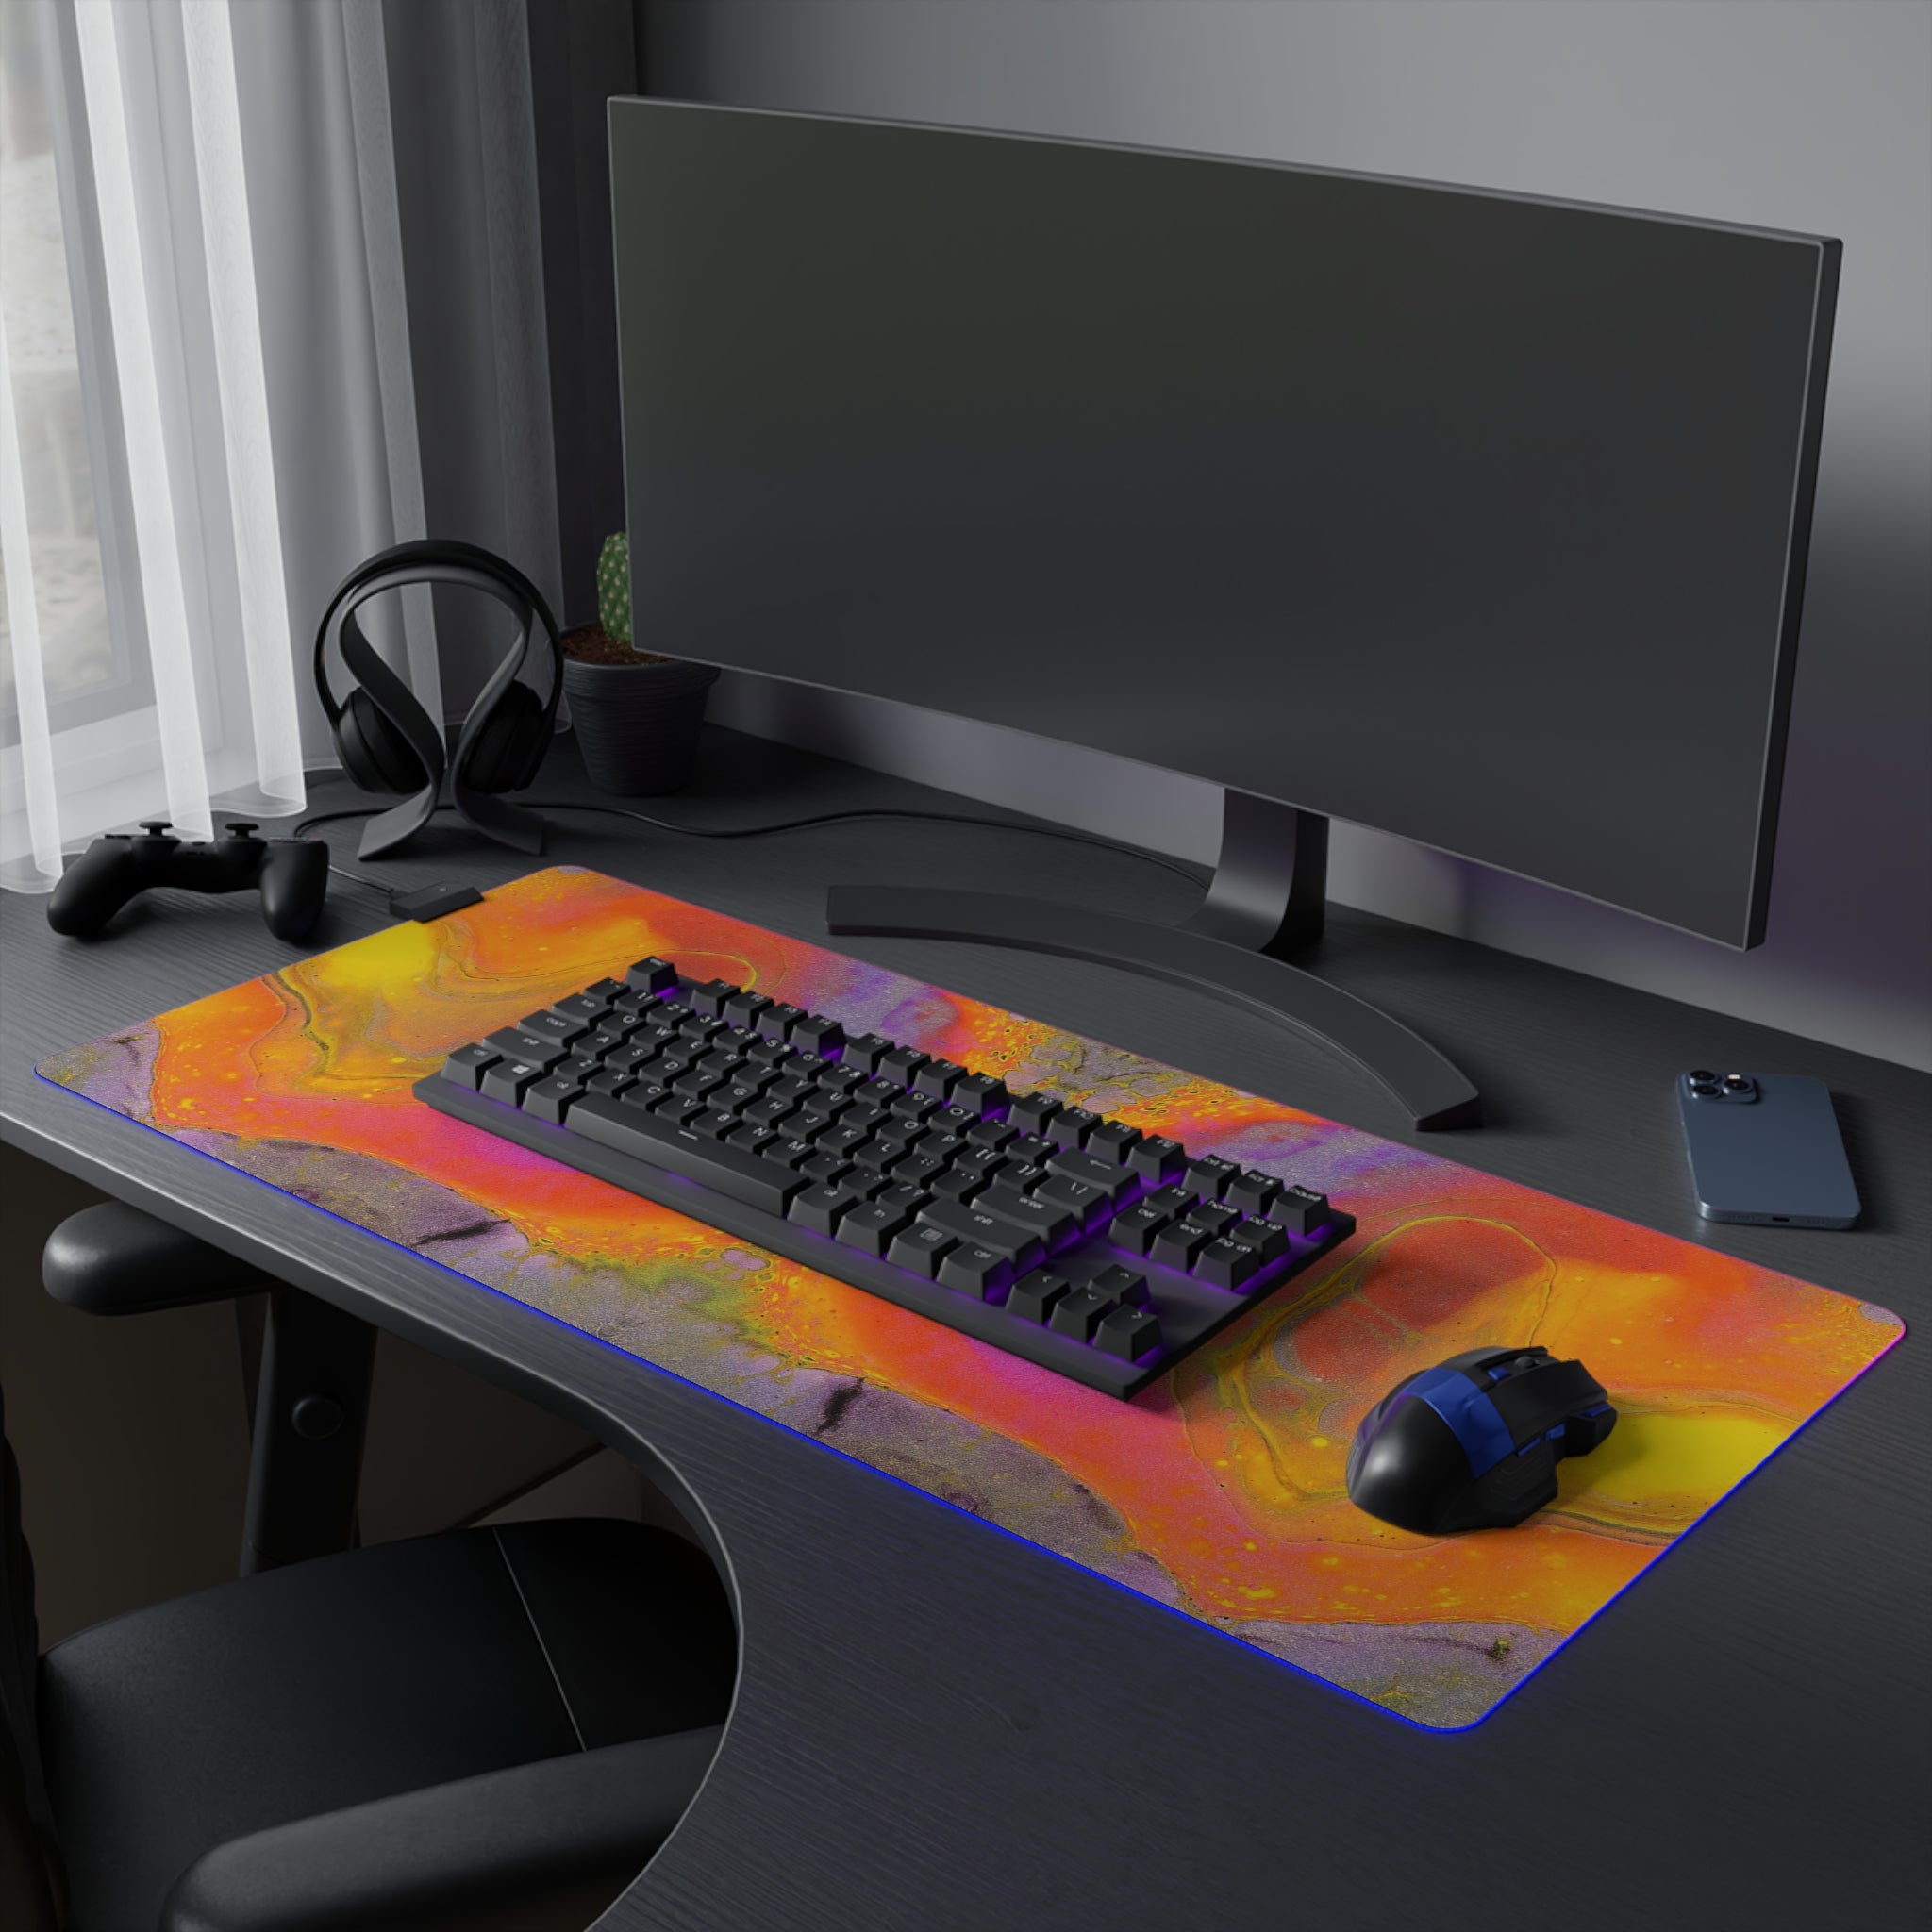 Smooth Moves - LED Gaming Mouse Pad